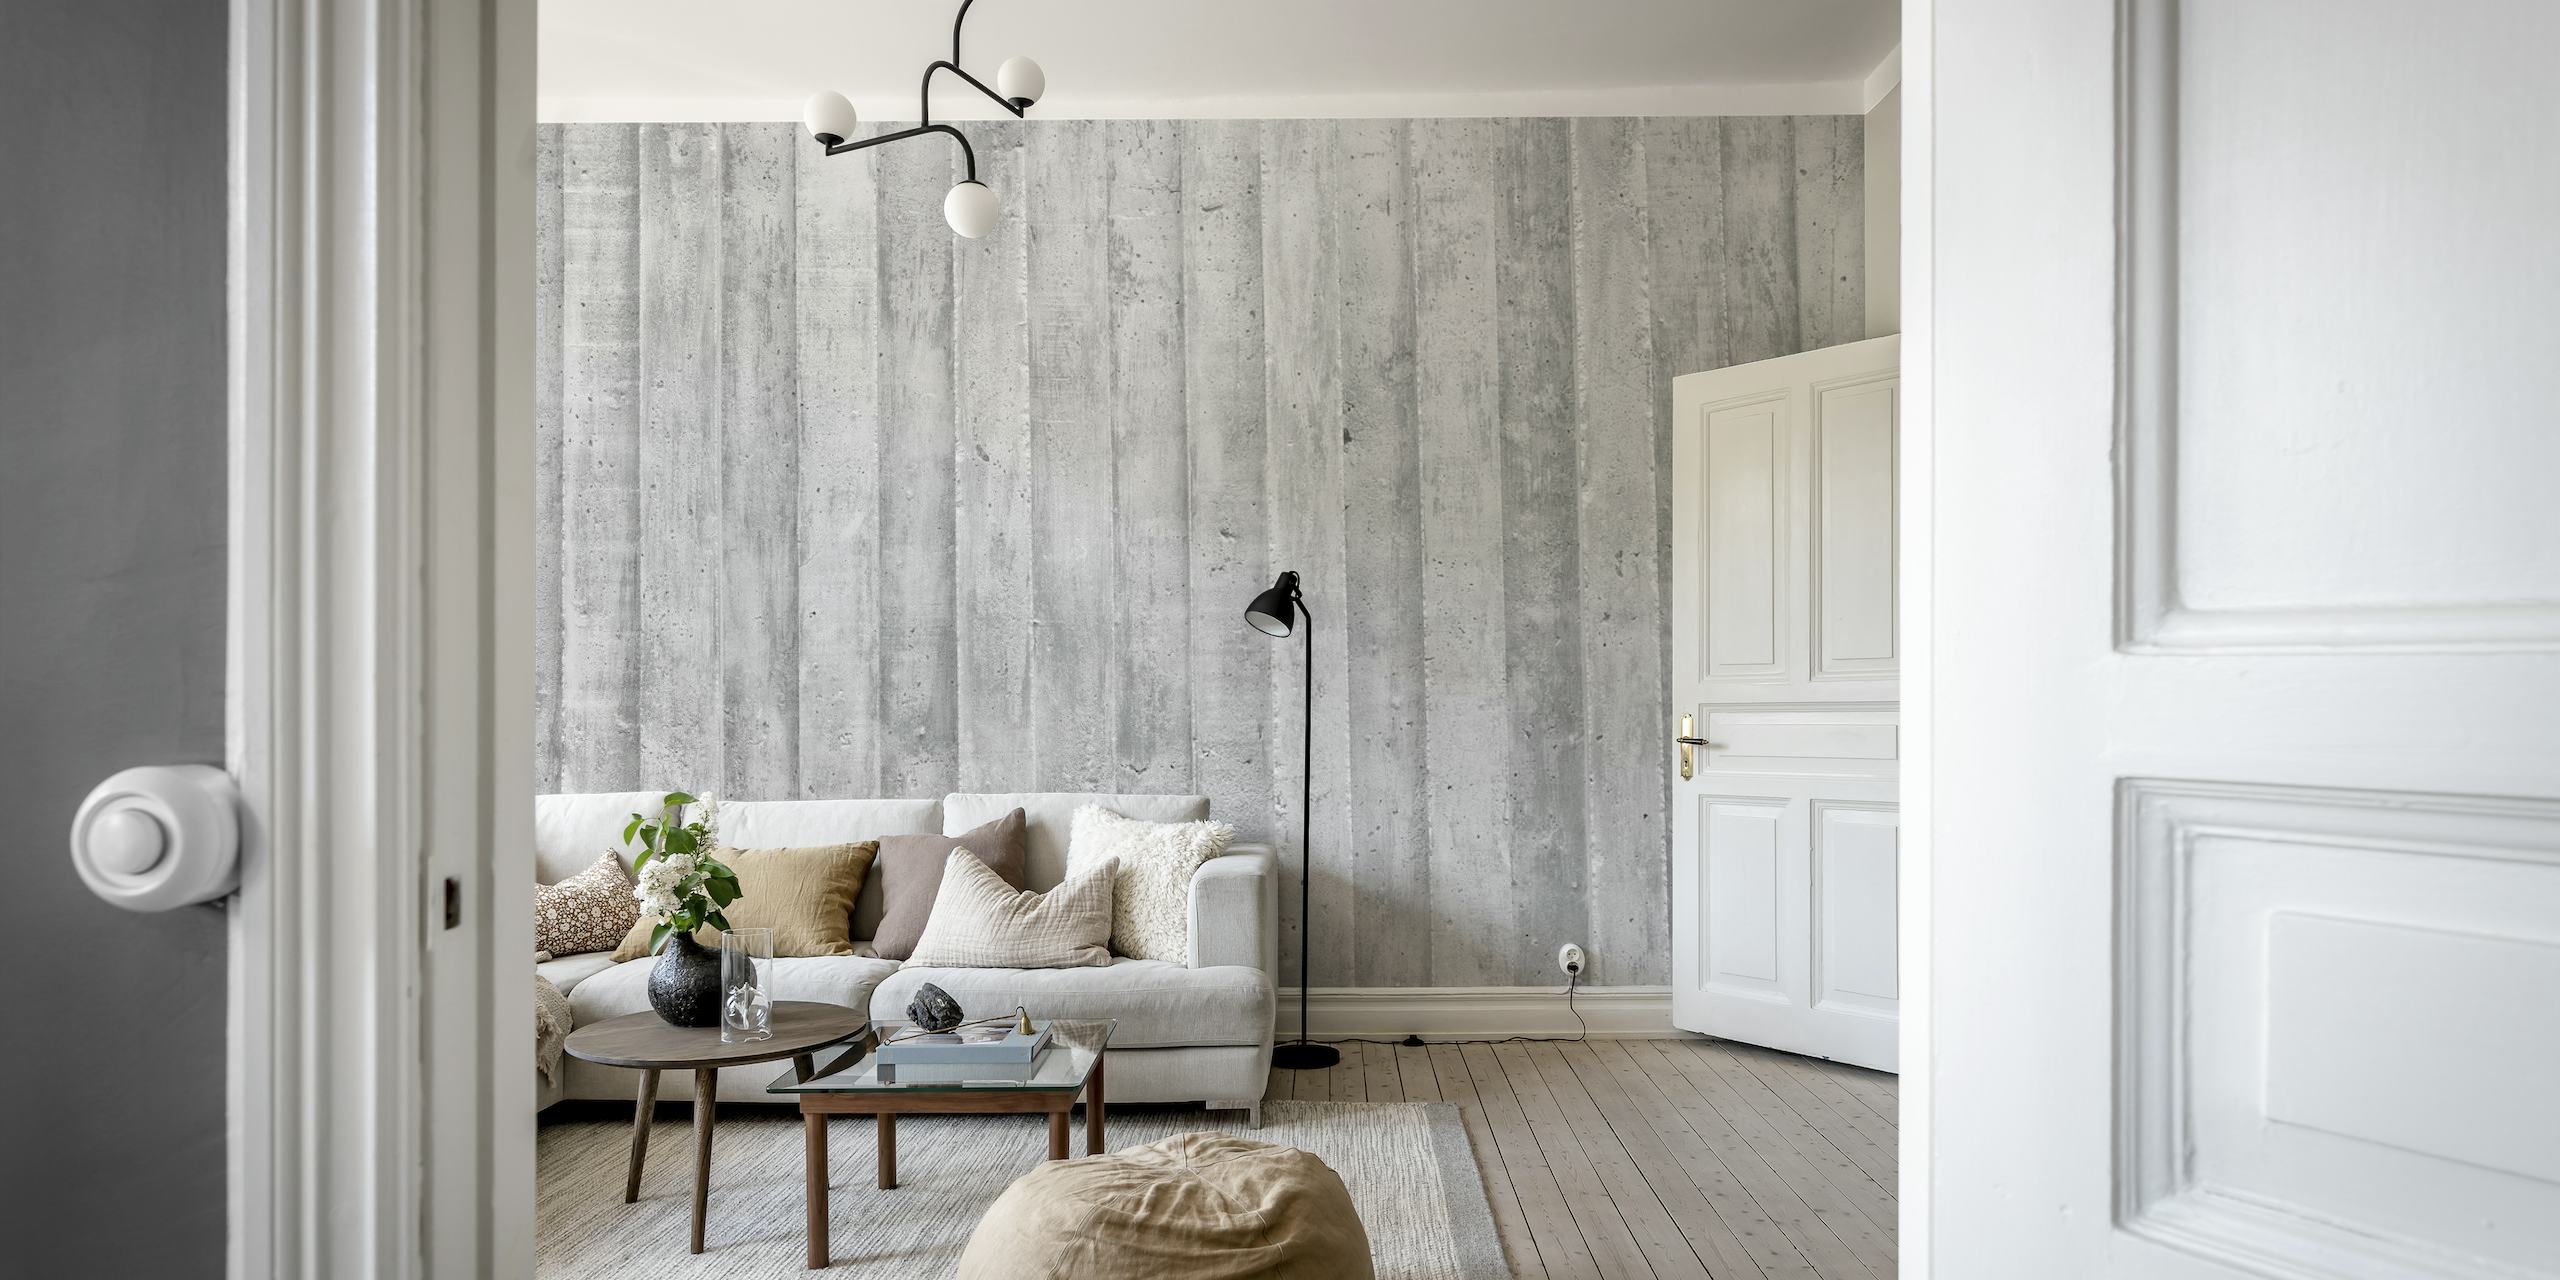 Textured striped stone wall mural in grayscale